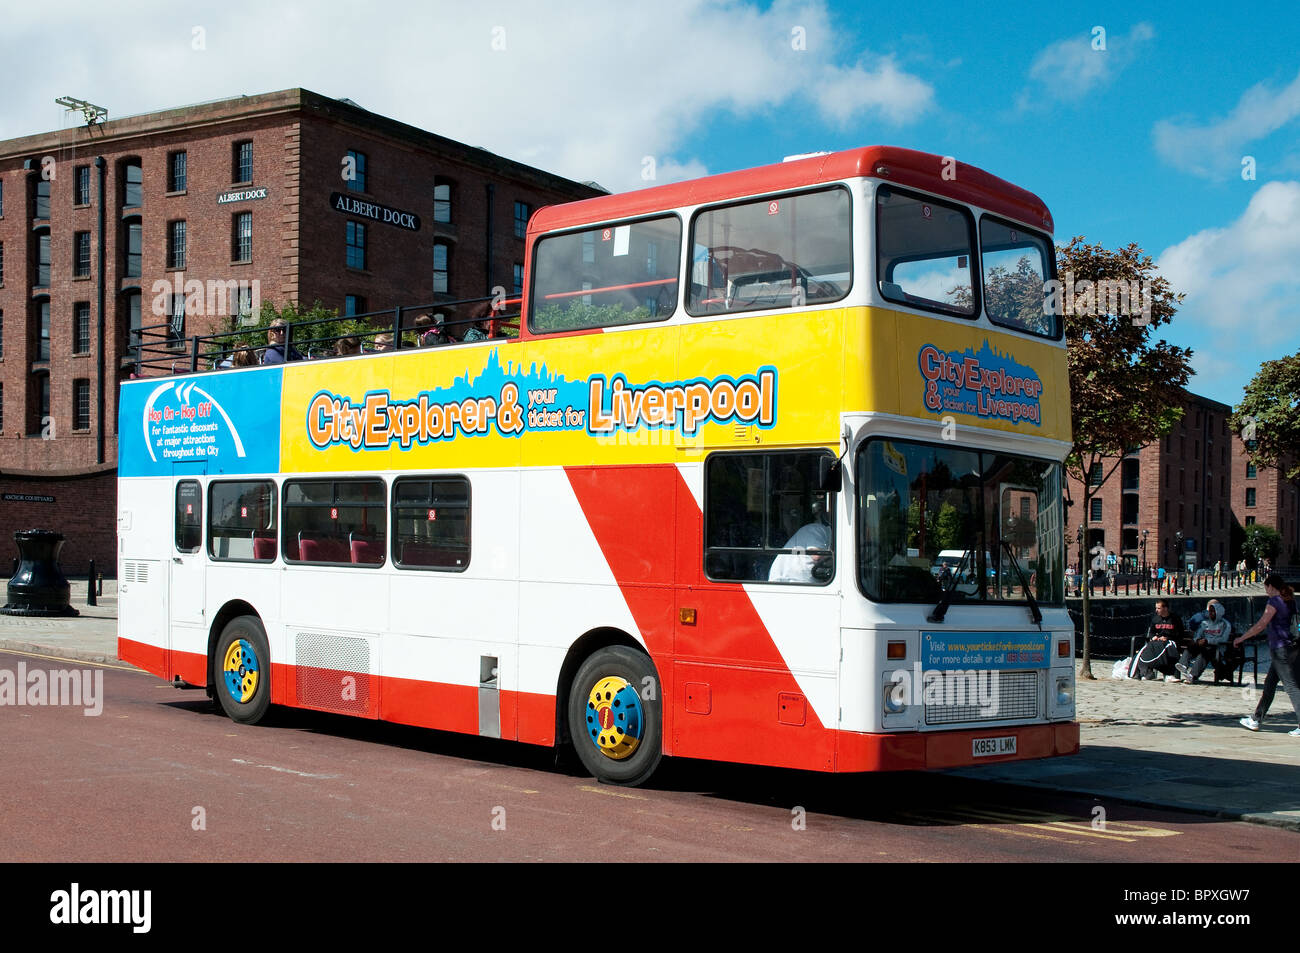 a city tour bus parked at the Albert docks in Liverpool, UK Stock Photo